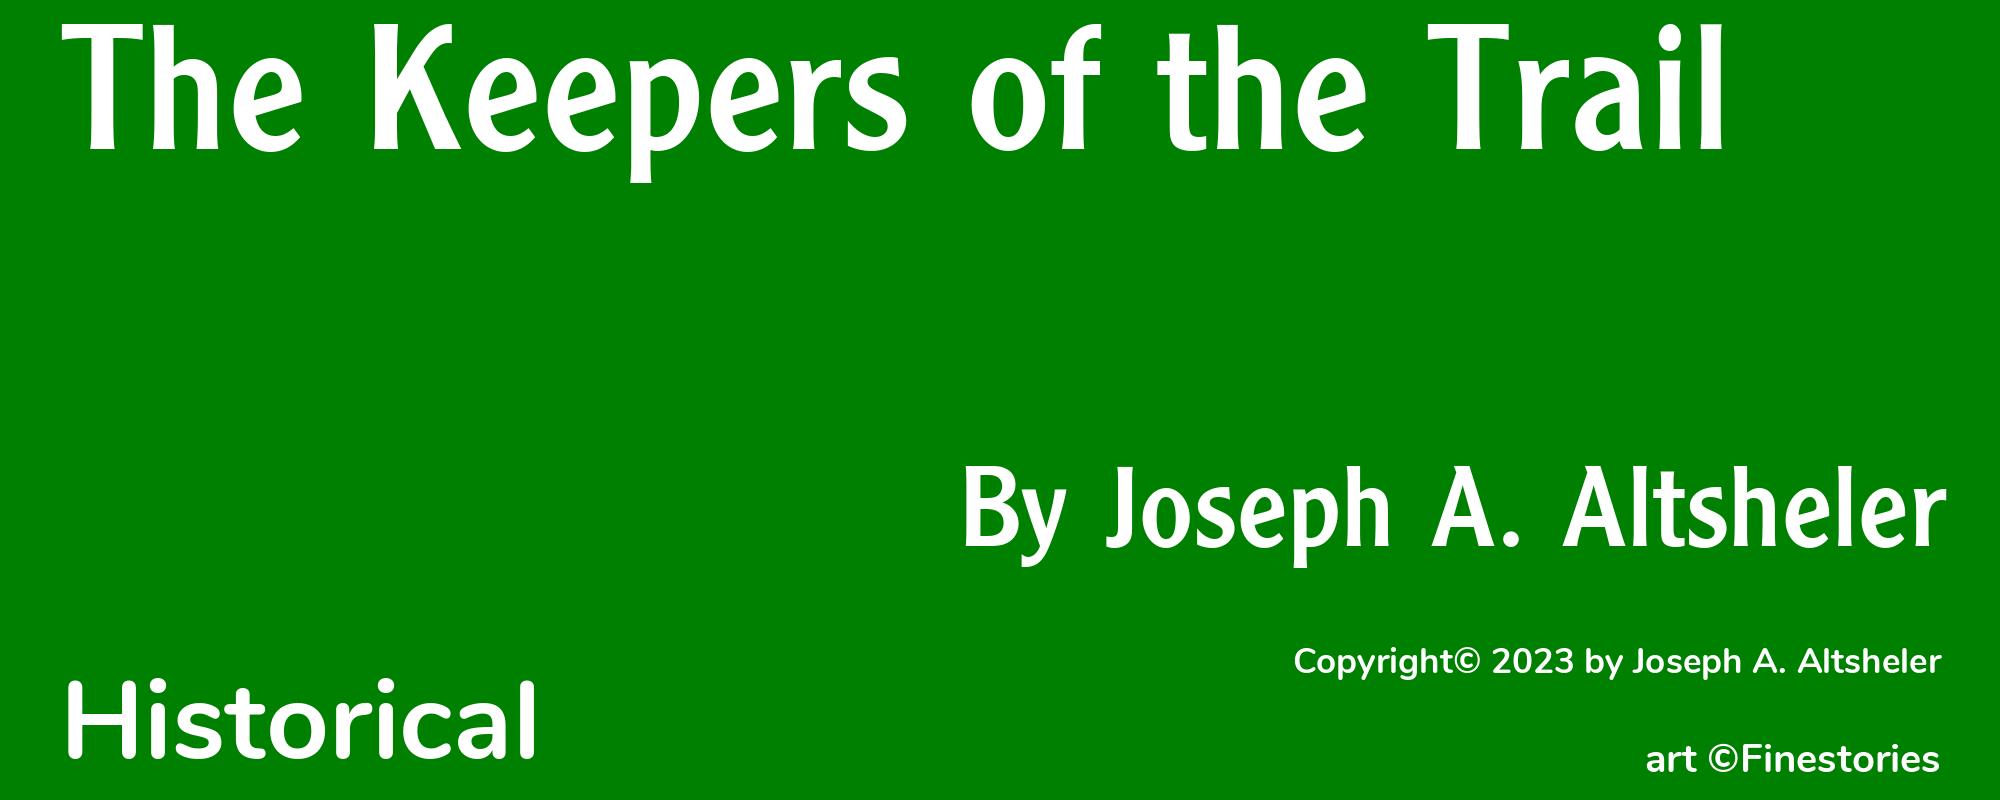 The Keepers of the Trail - Cover